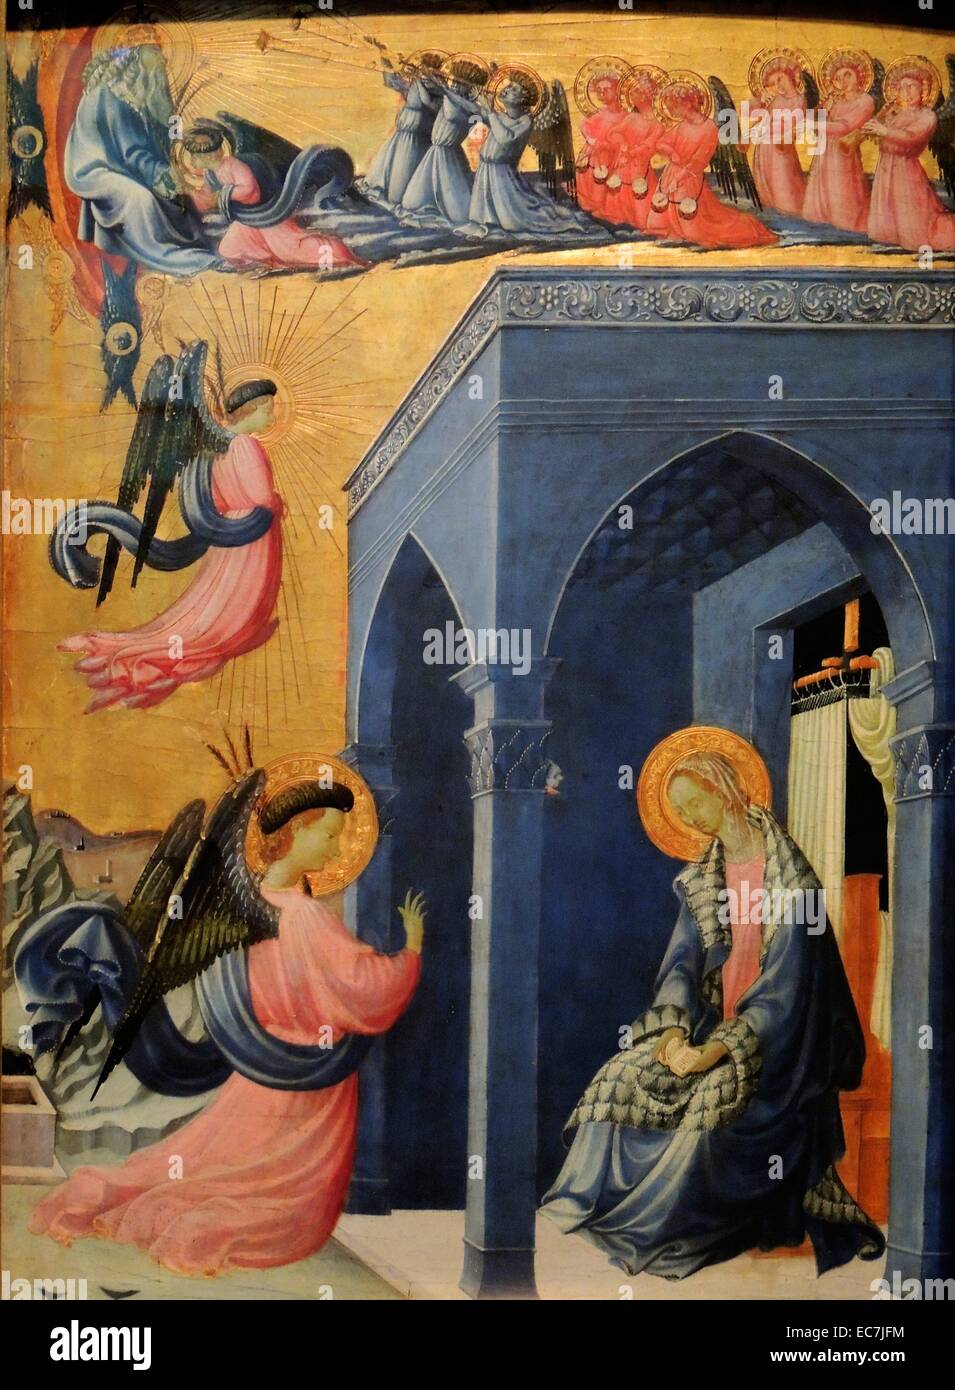 Attributed to Paolo di Dono, called Uccello (1397 -1475). The Annunciation, tempera and gilding on panel.  The Archangel Gabriel was commanded by God to announce to the Virgin Mary that she would give birth to the Saviour.  The imagery recalls that of ornate illuminated manuscripts.  With lavish use of gold and ultramarine blue, this devotional image would have been very expensive to produce. Dated 15th Century Stock Photo